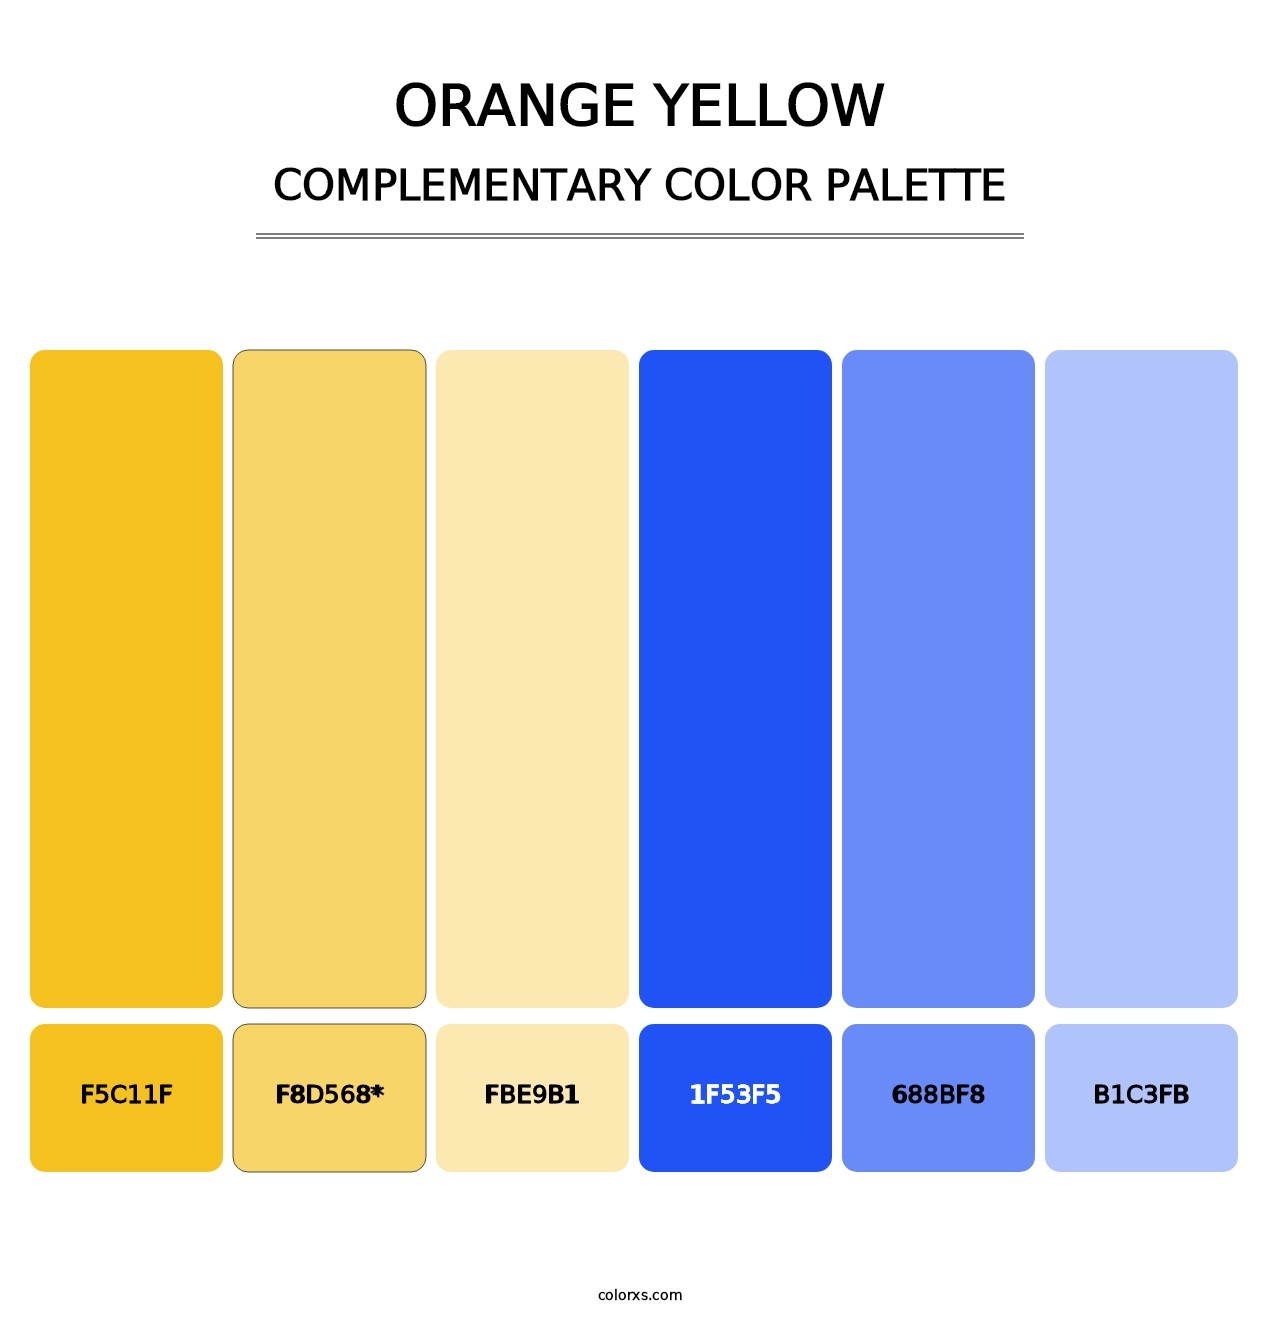 Orange Yellow - Complementary Color Palette